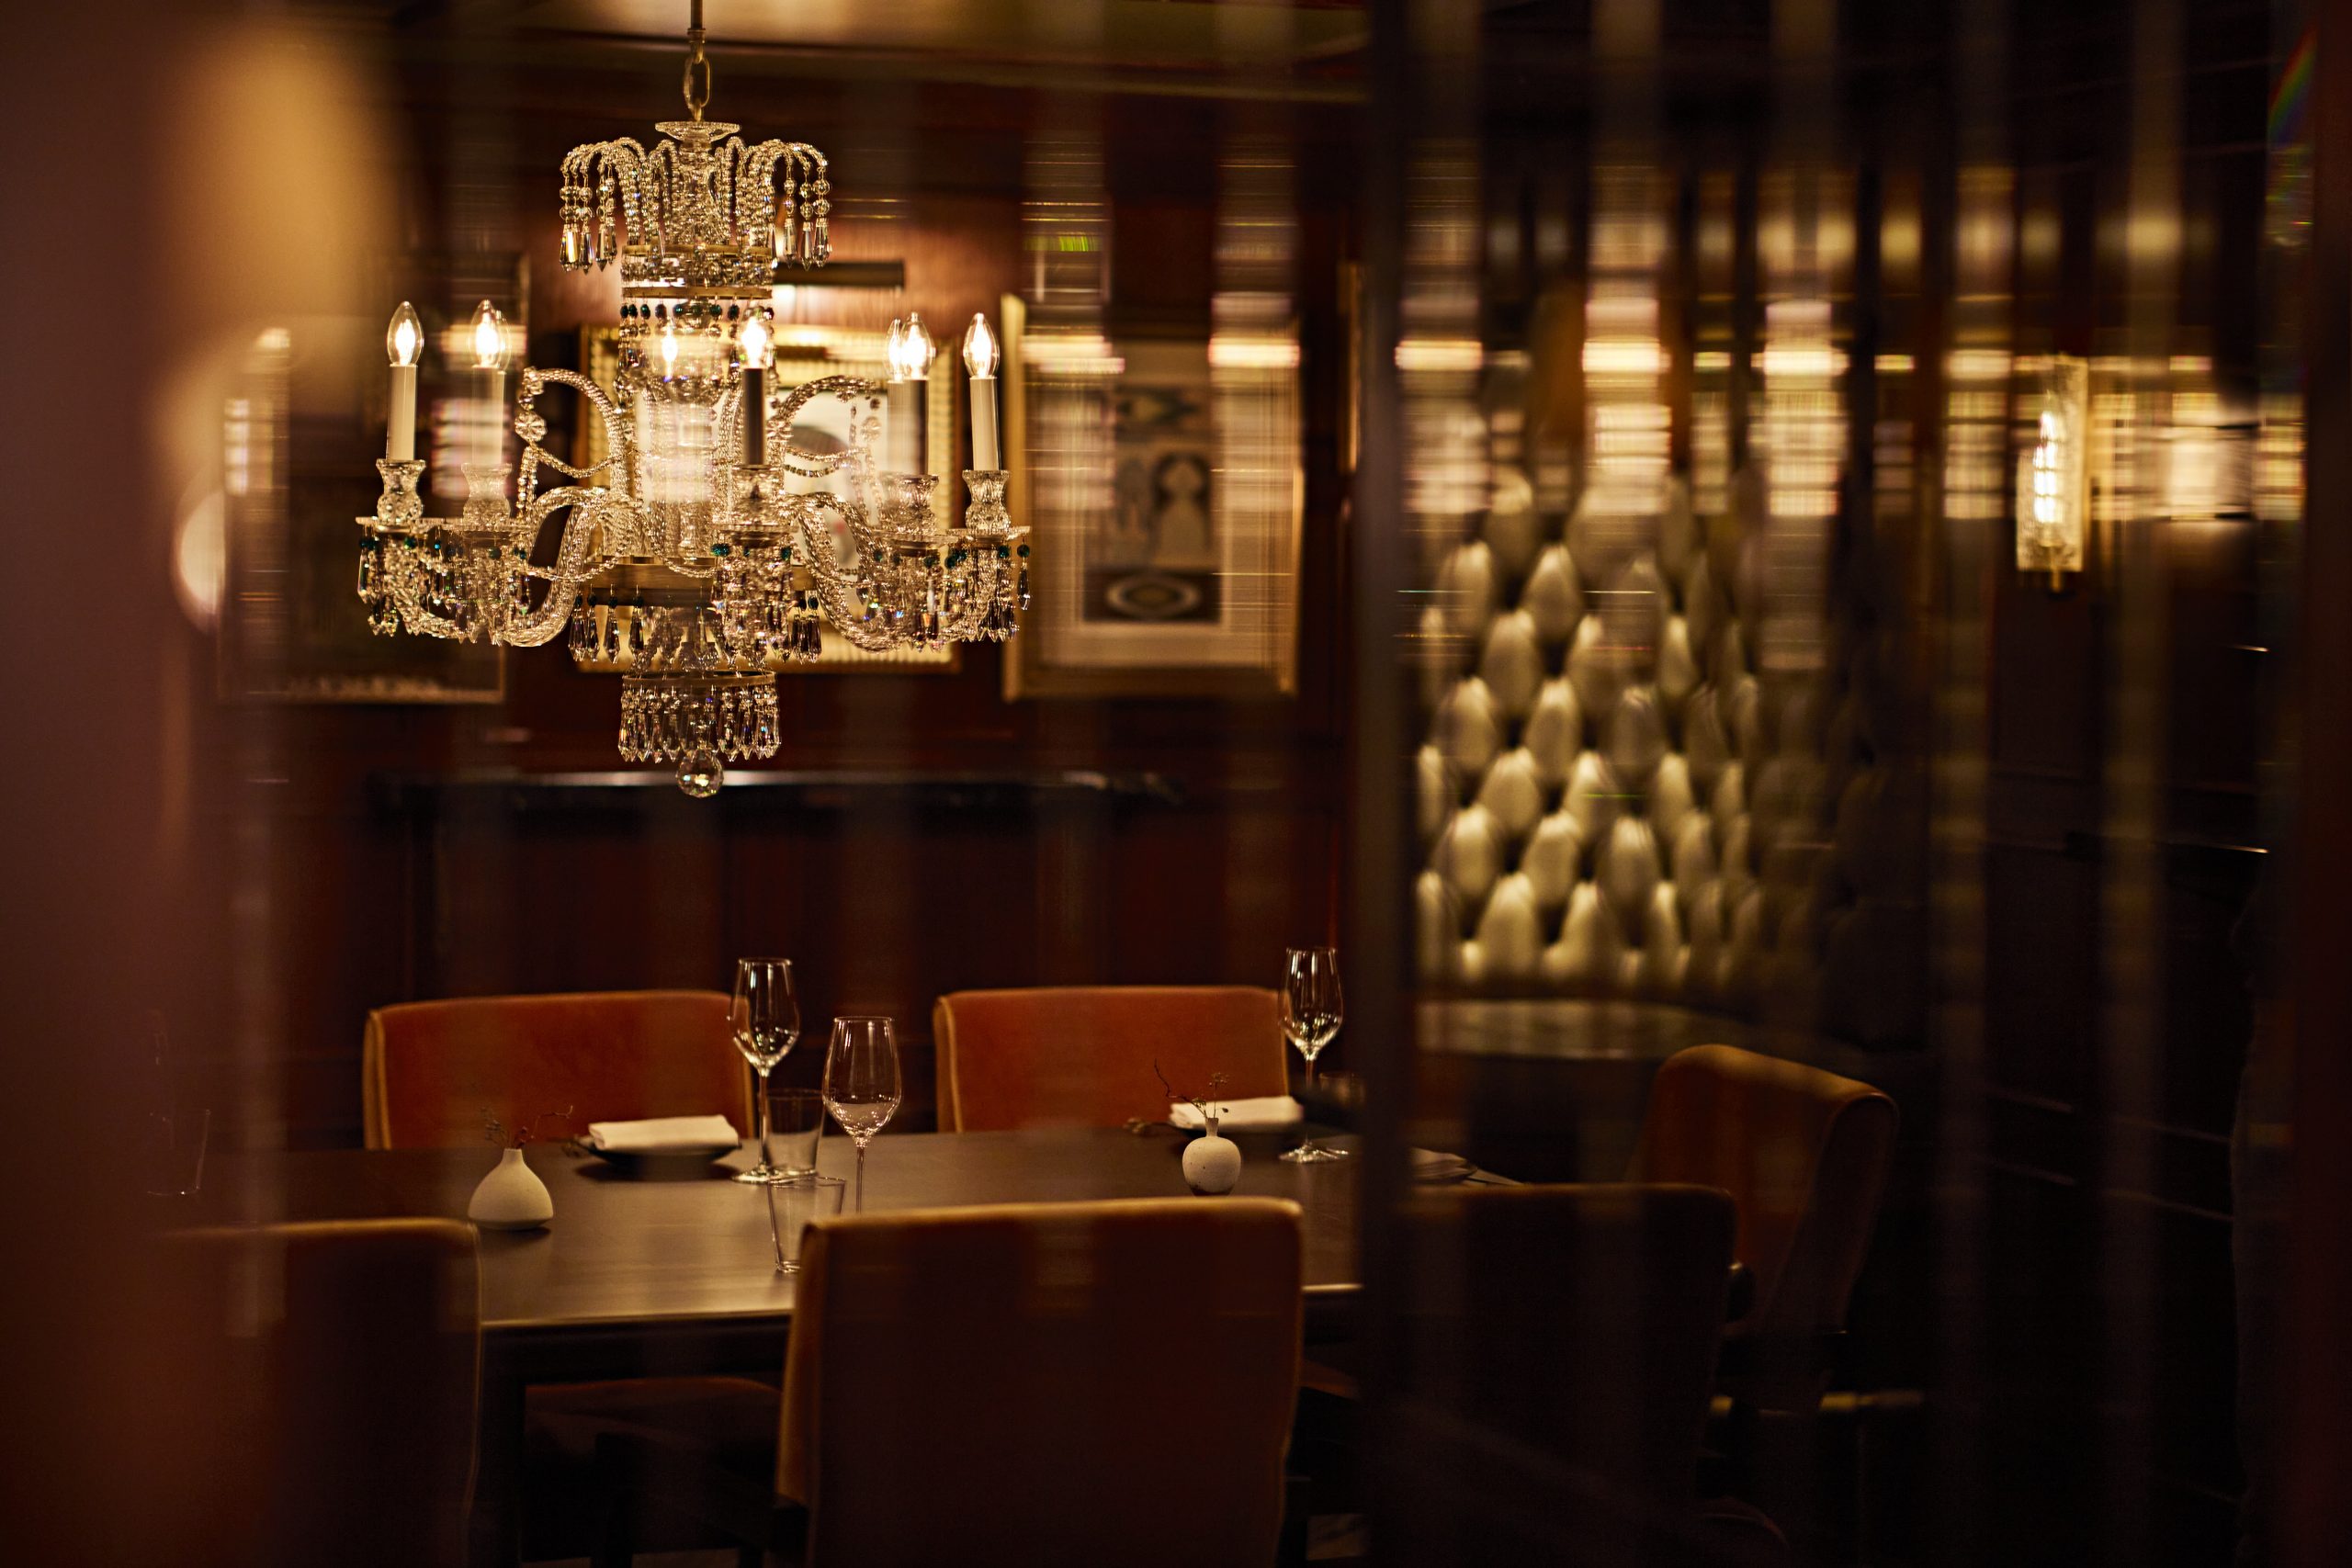 Private Dining Elegance: Ornate glass chandelier, wooden table, warm lighting